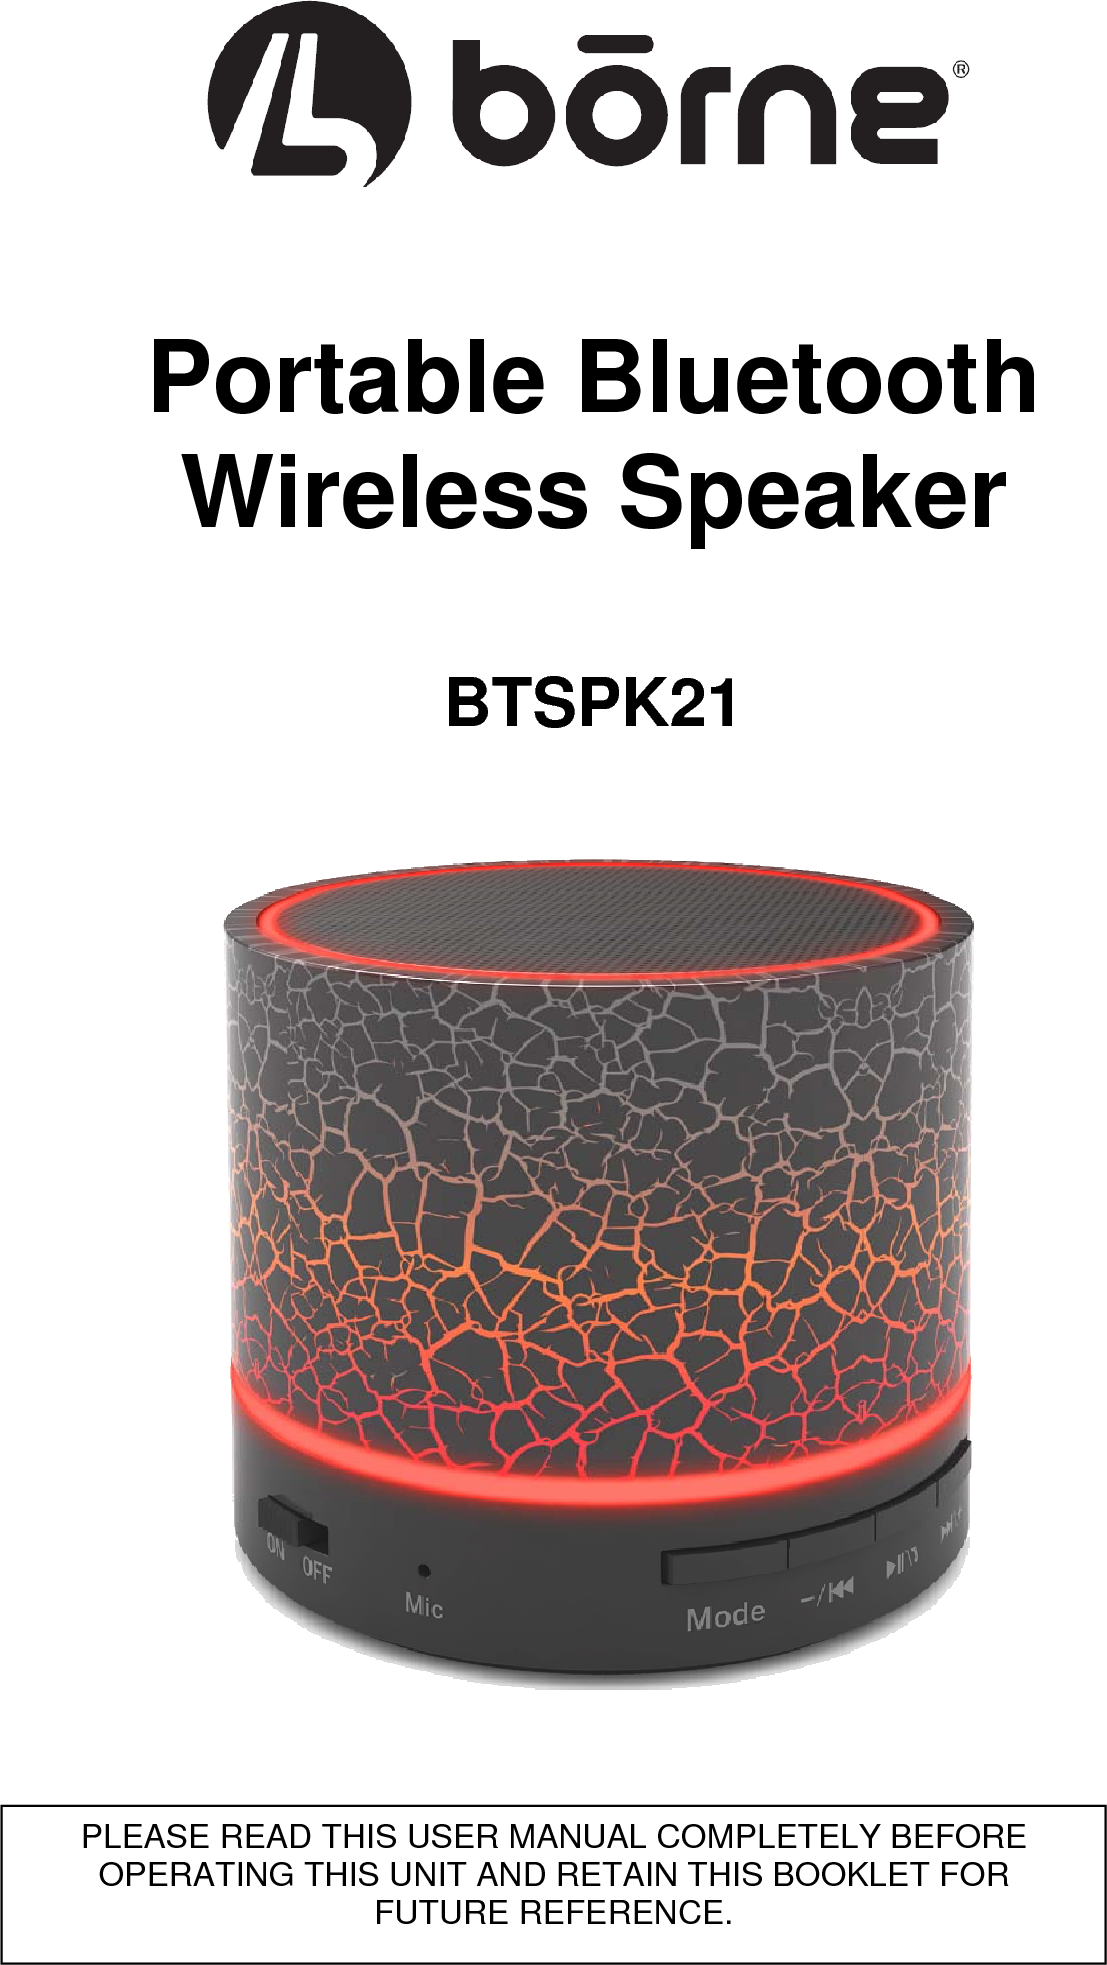     Portable Bluetooth Wireless Speaker  BTSPK21                                                  PLEASE READ THIS USER MANUAL COMPLETELY BEFORE OPERATING THIS UNIT AND RETAIN THIS BOOKLET FOR FUTURE REFERENCE. 